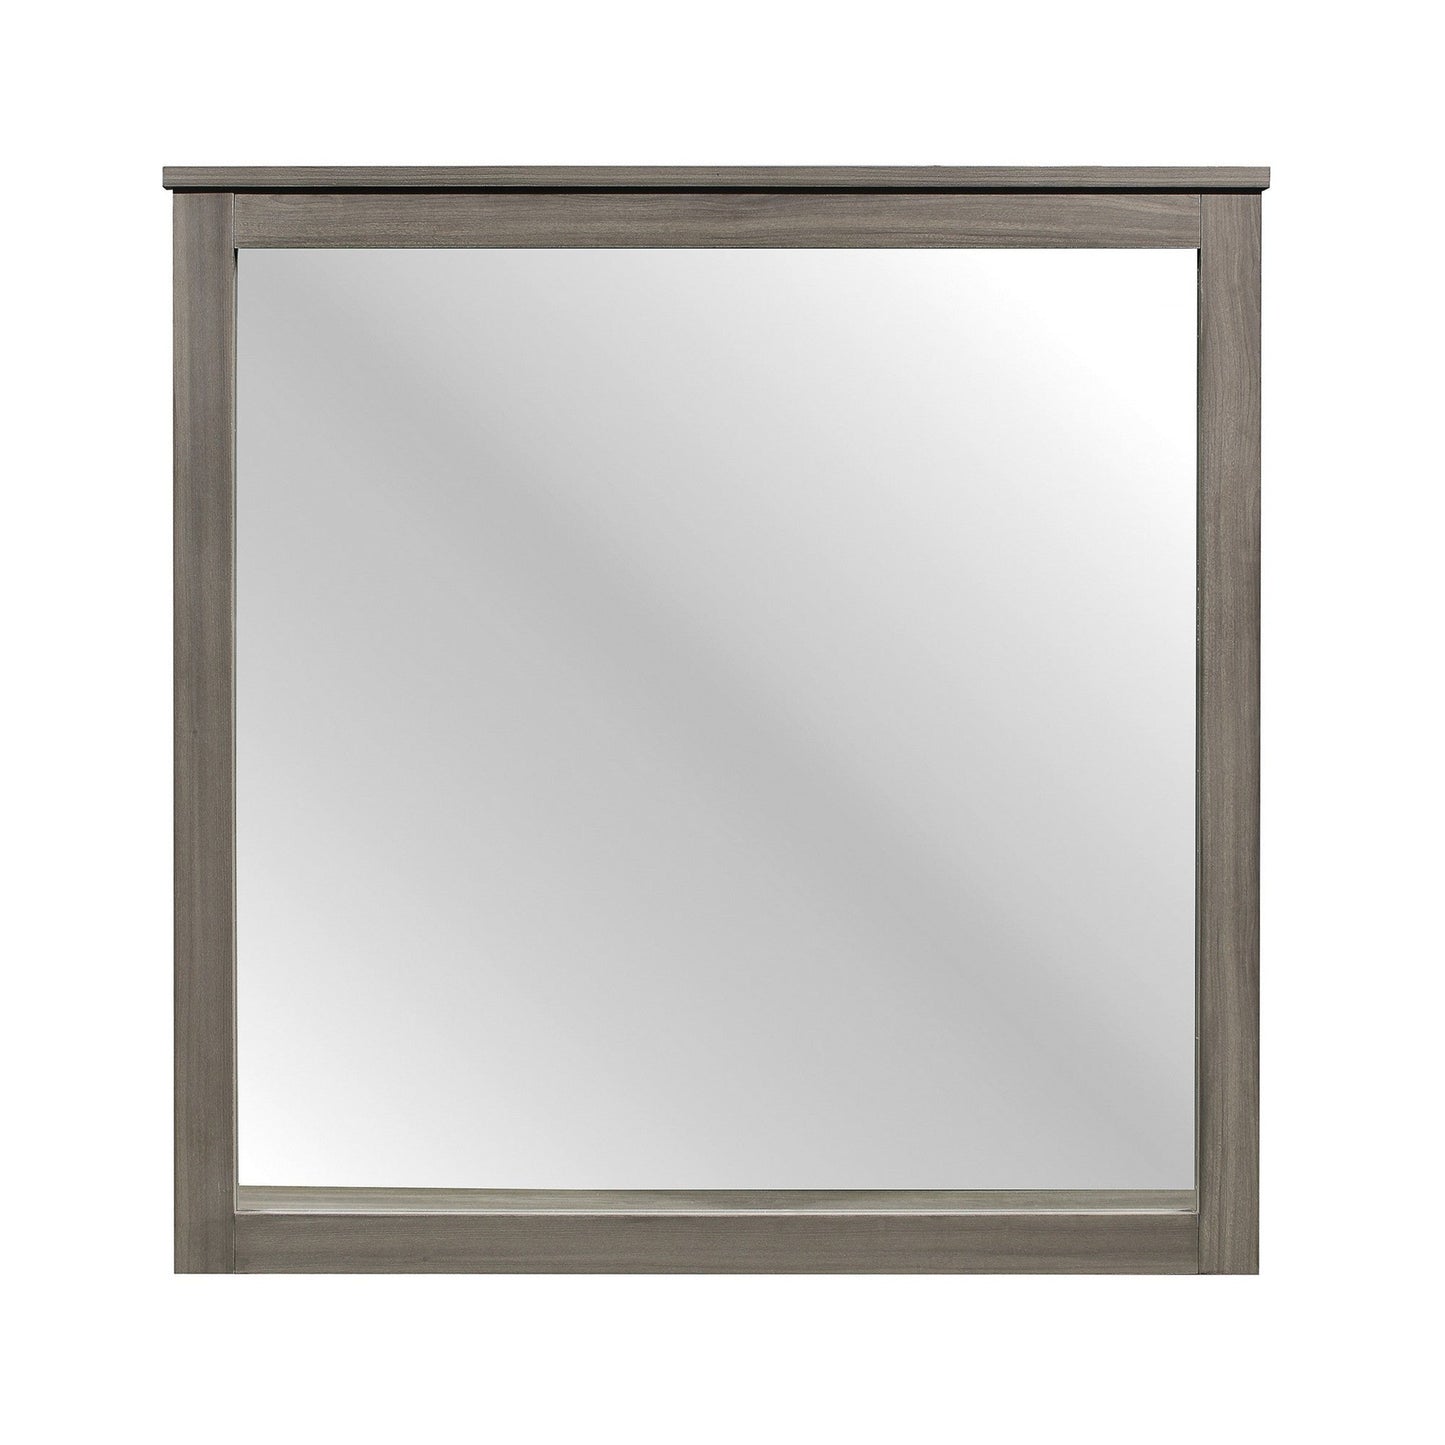 Benzara Dark Gray and Silver Square Wooden Frame Mirror With Grain Details